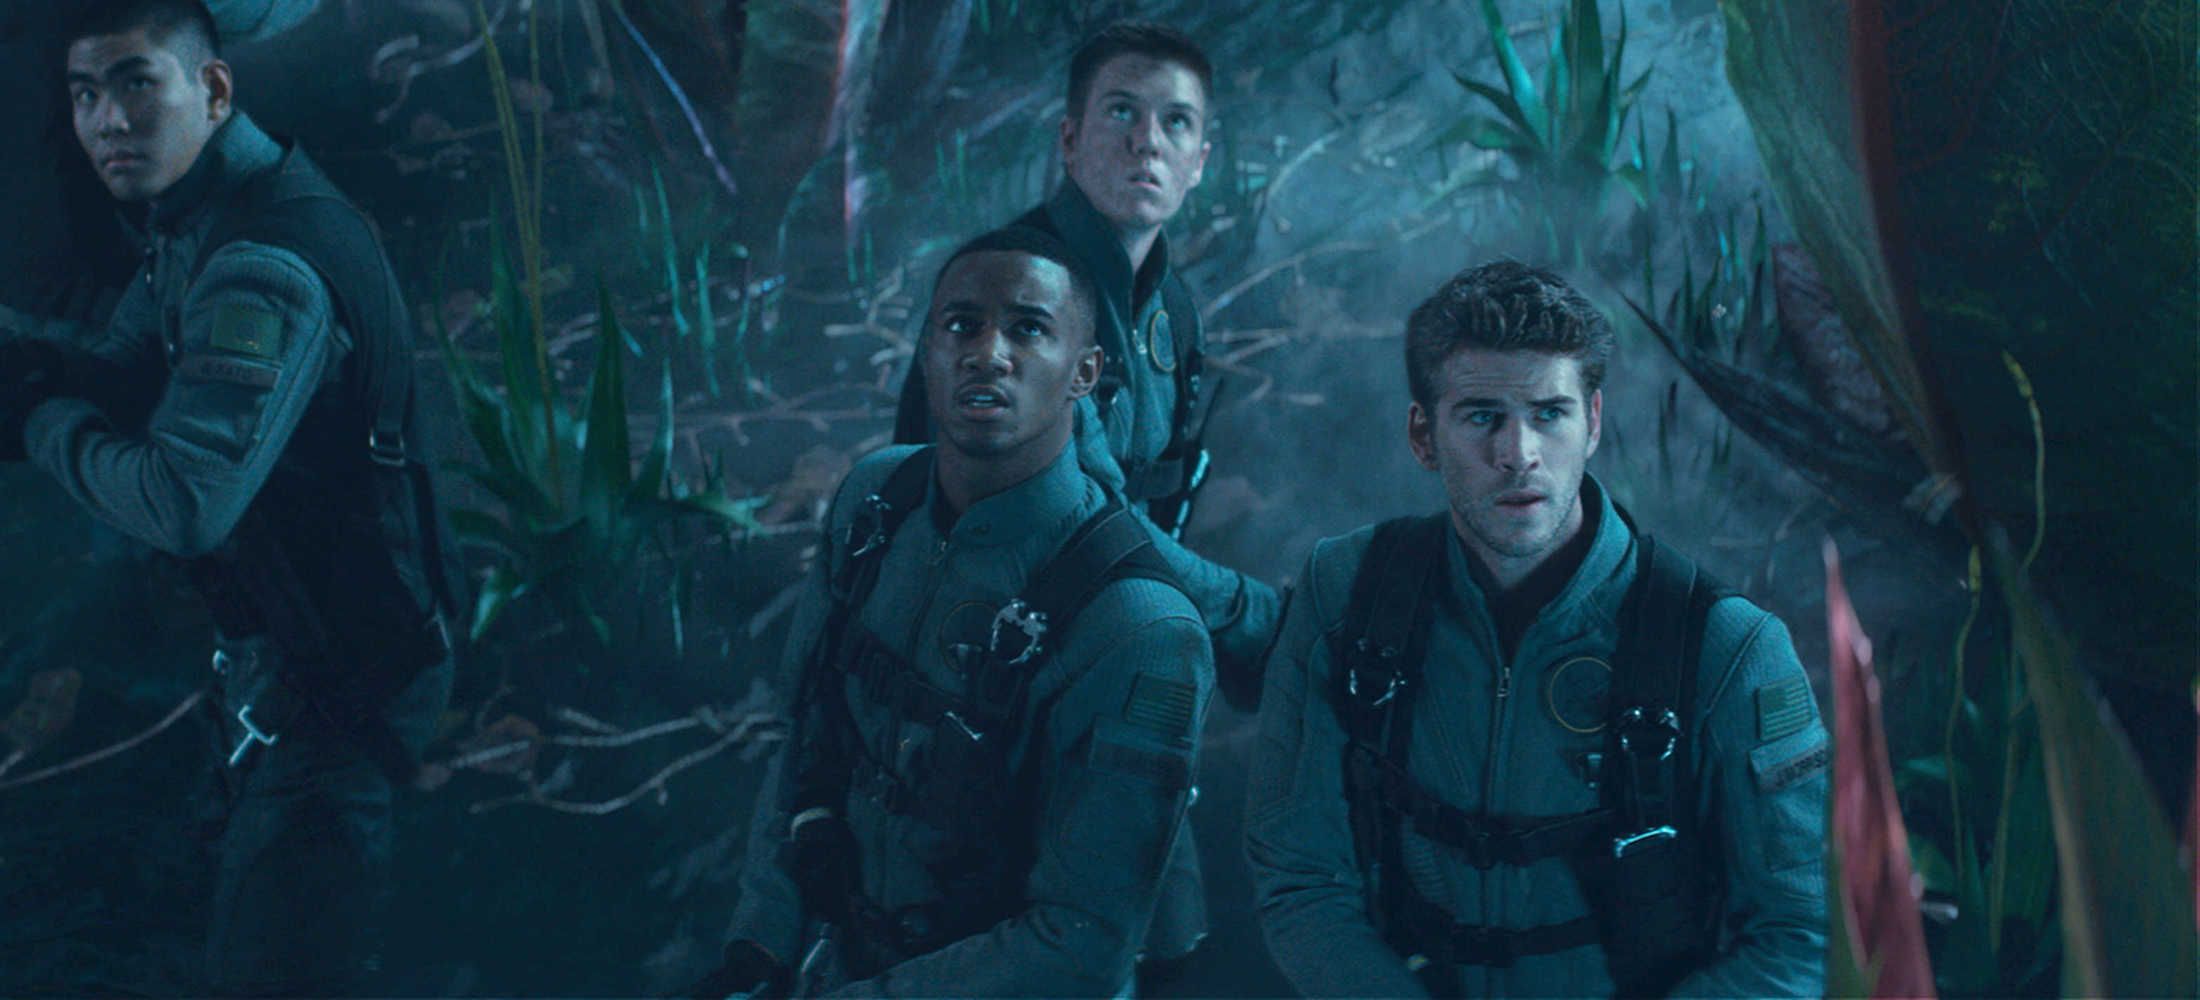 Jessie T. Usher as Dylan Hiller and Liam Hemsworth as Jake Morrison in Independence Day: Resurgence